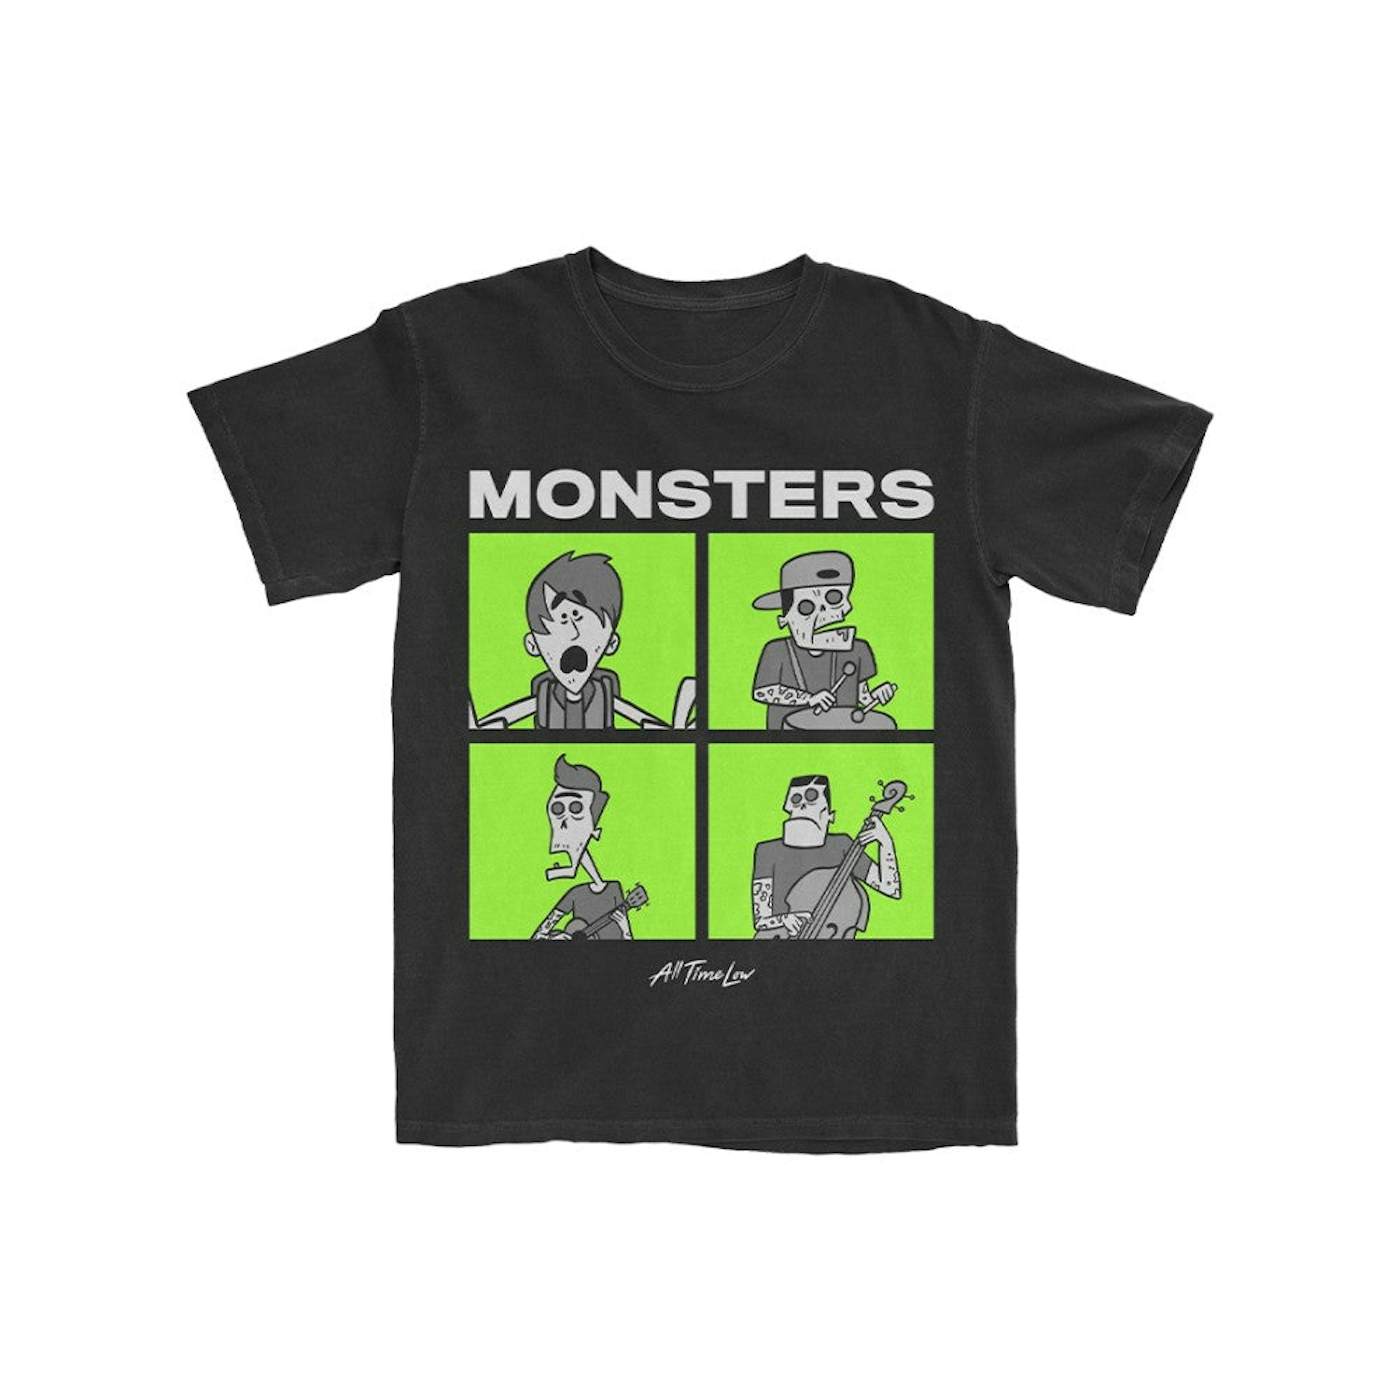 All Time Low Monsters T-shirt